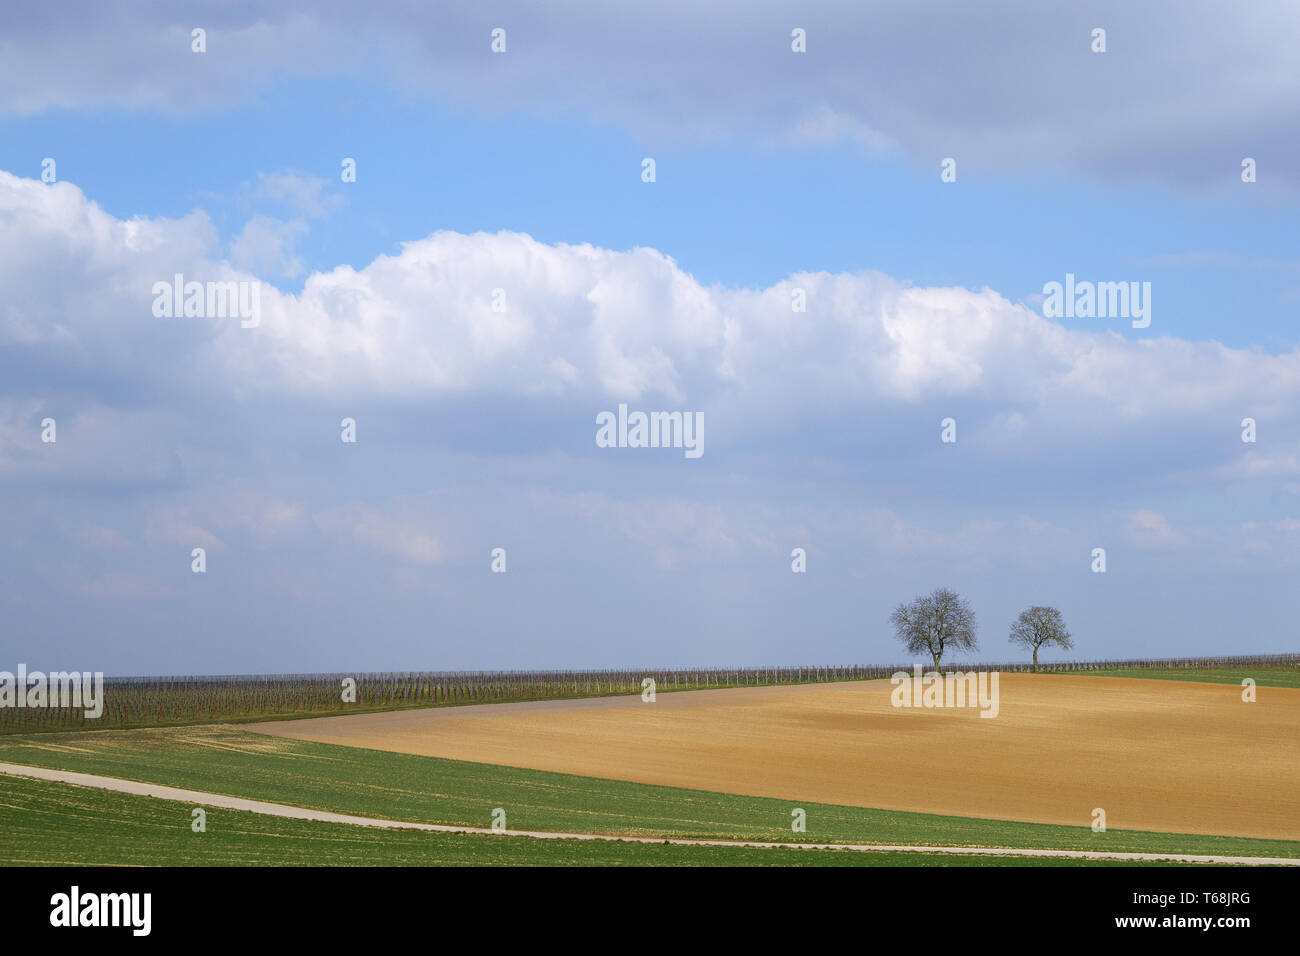 Two walnut trees in front of cloudy sky Stock Photo